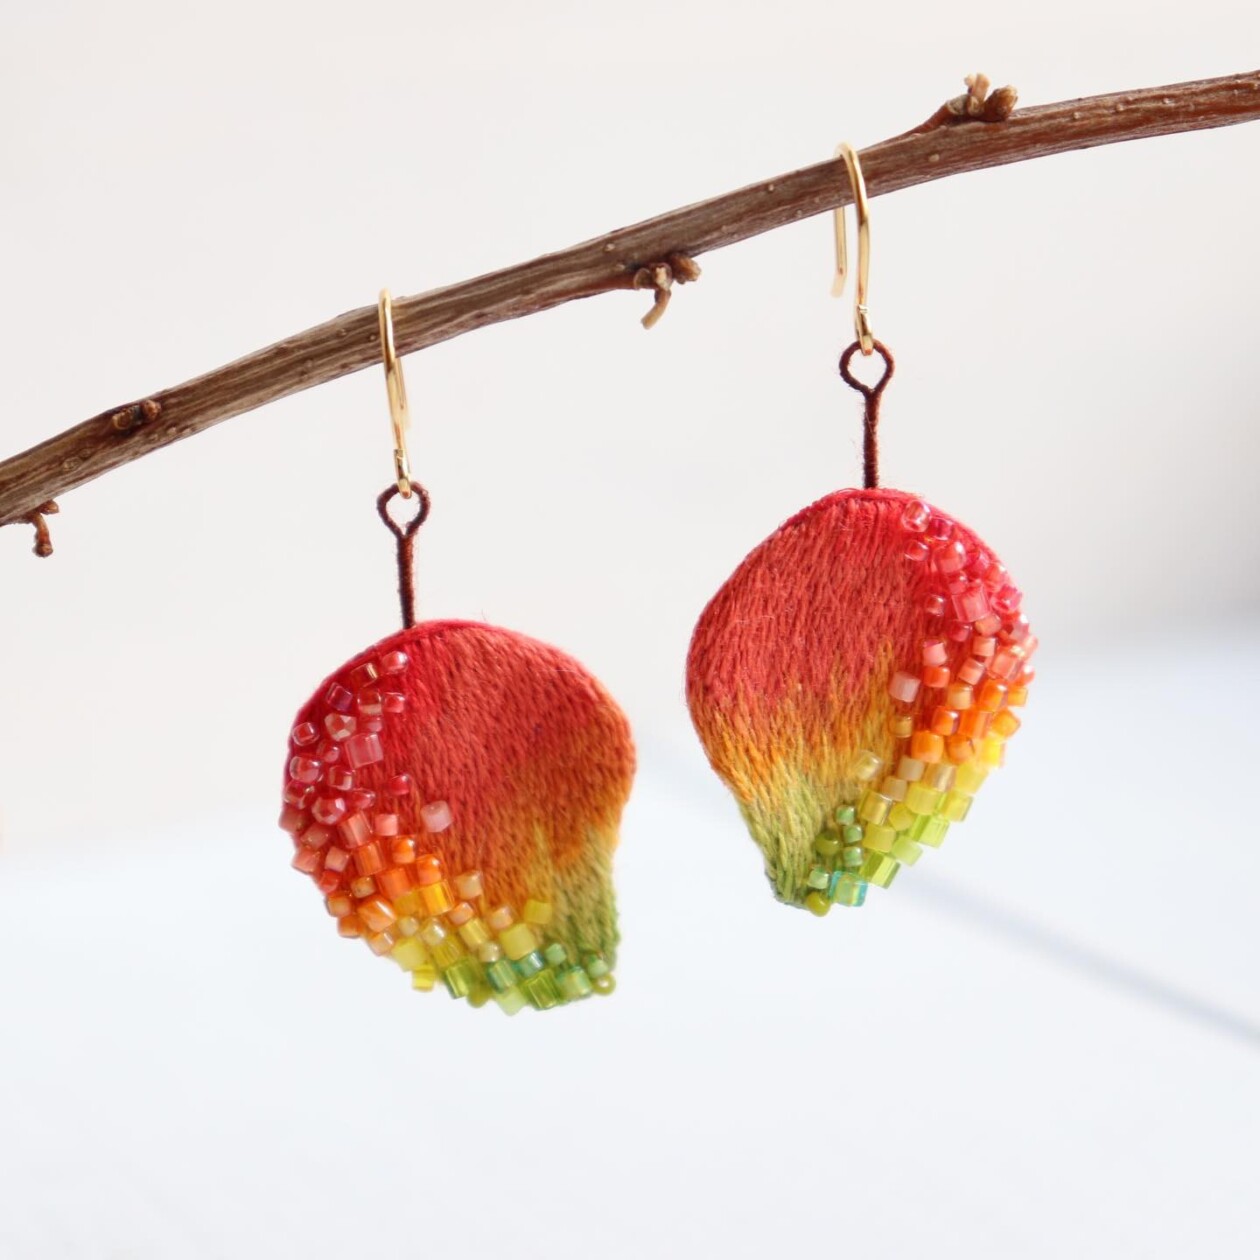 Eye Catching Handmade Embroidered Earrings By Vivaembr (12)